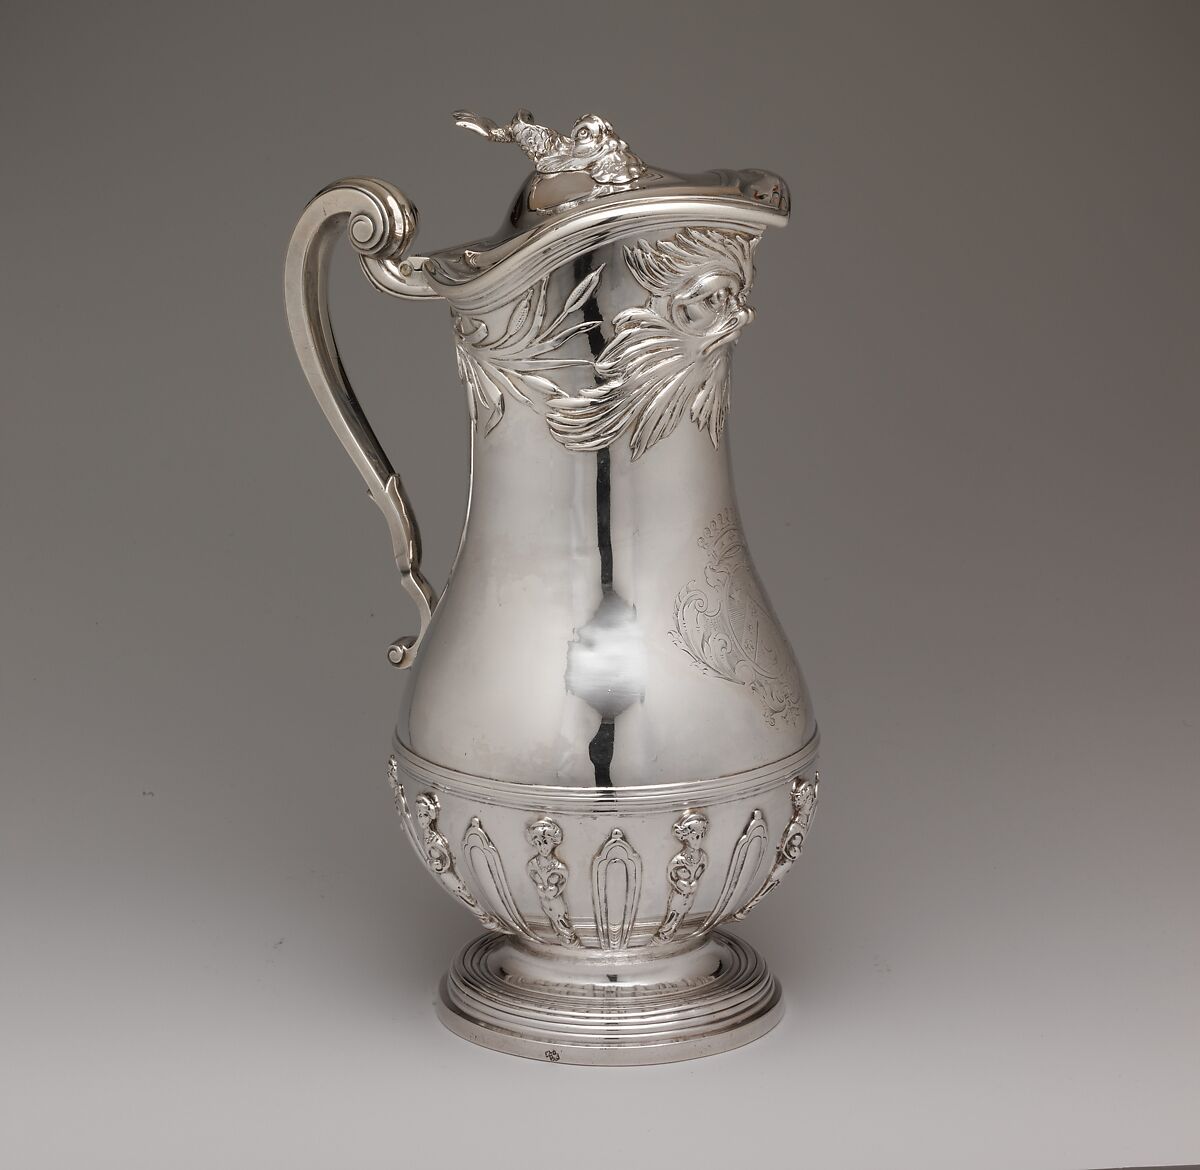 Ewer, Marc Bazille (1706–1777, master 1732), Silver, French, Montpellier 